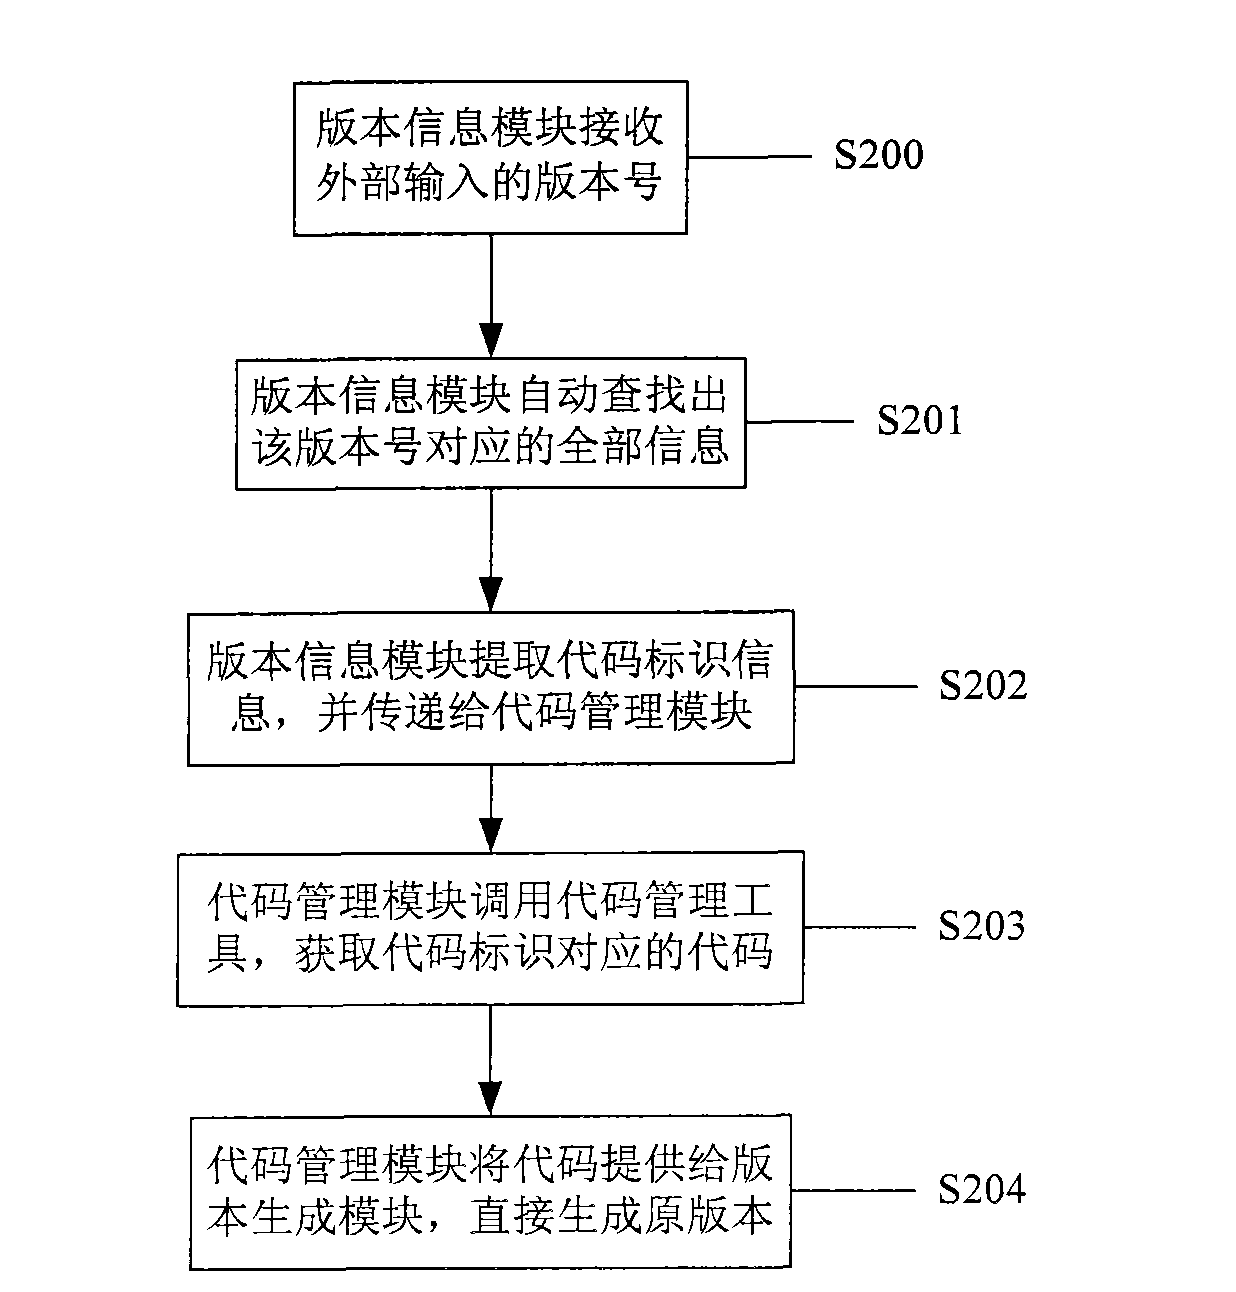 TD fixed wireless phone software version management system and application method of such system